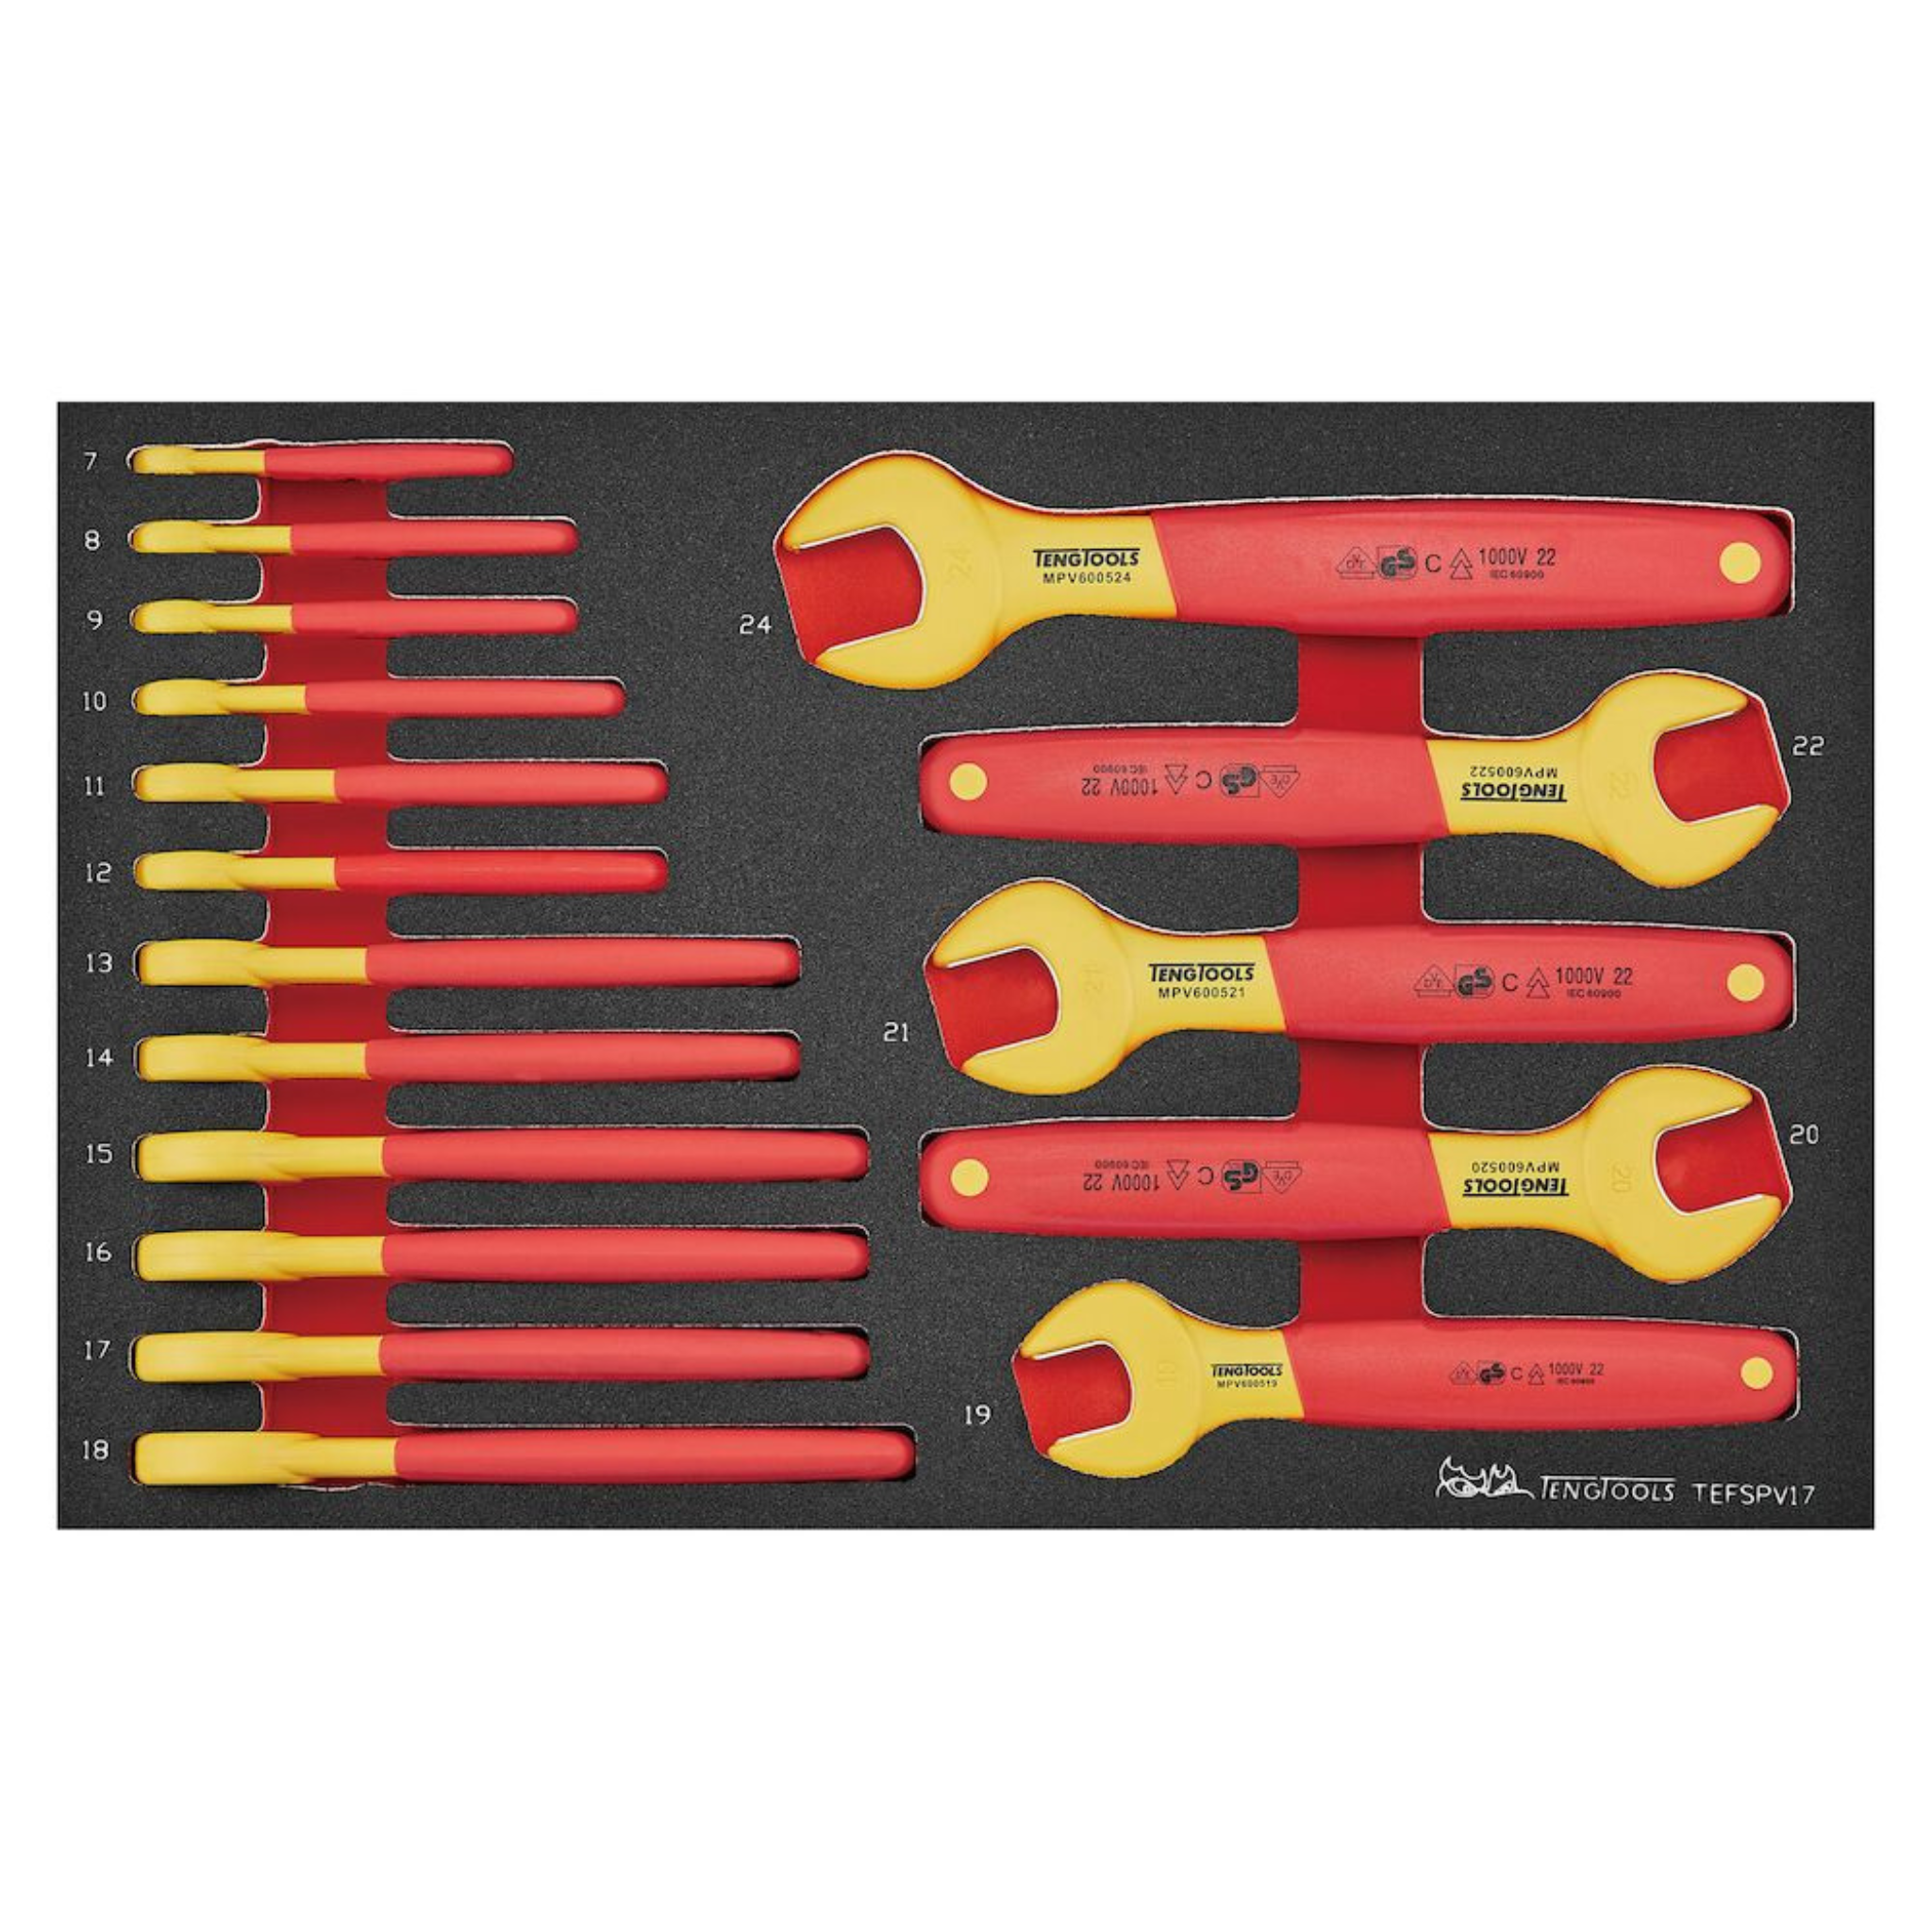 Teng Tools 52 Piece 1000 Volt Insulated Torque Screwdriver, Open Ended Wrench & Electrician Portable EVA Foam Tool Kit - SCE5